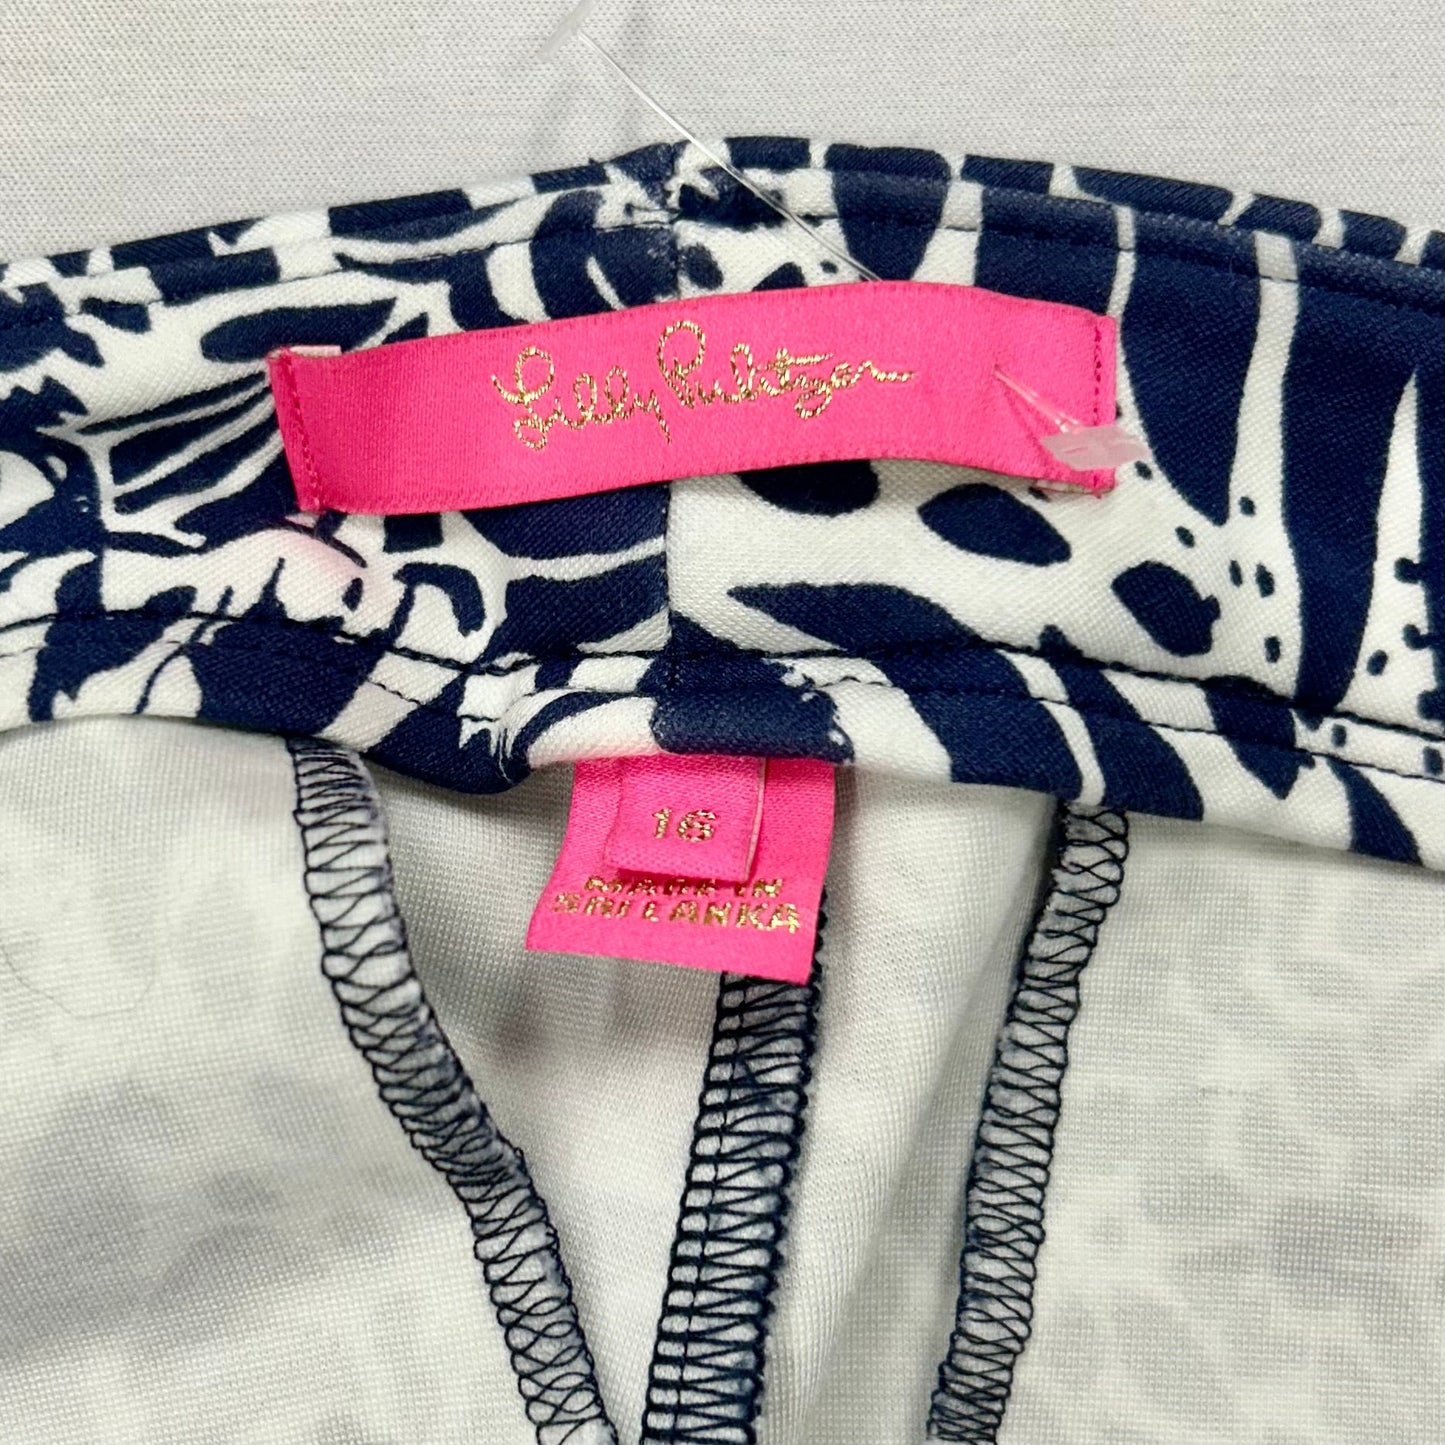 Blue & White Pants Designer By Lilly Pulitzer, Size: 16